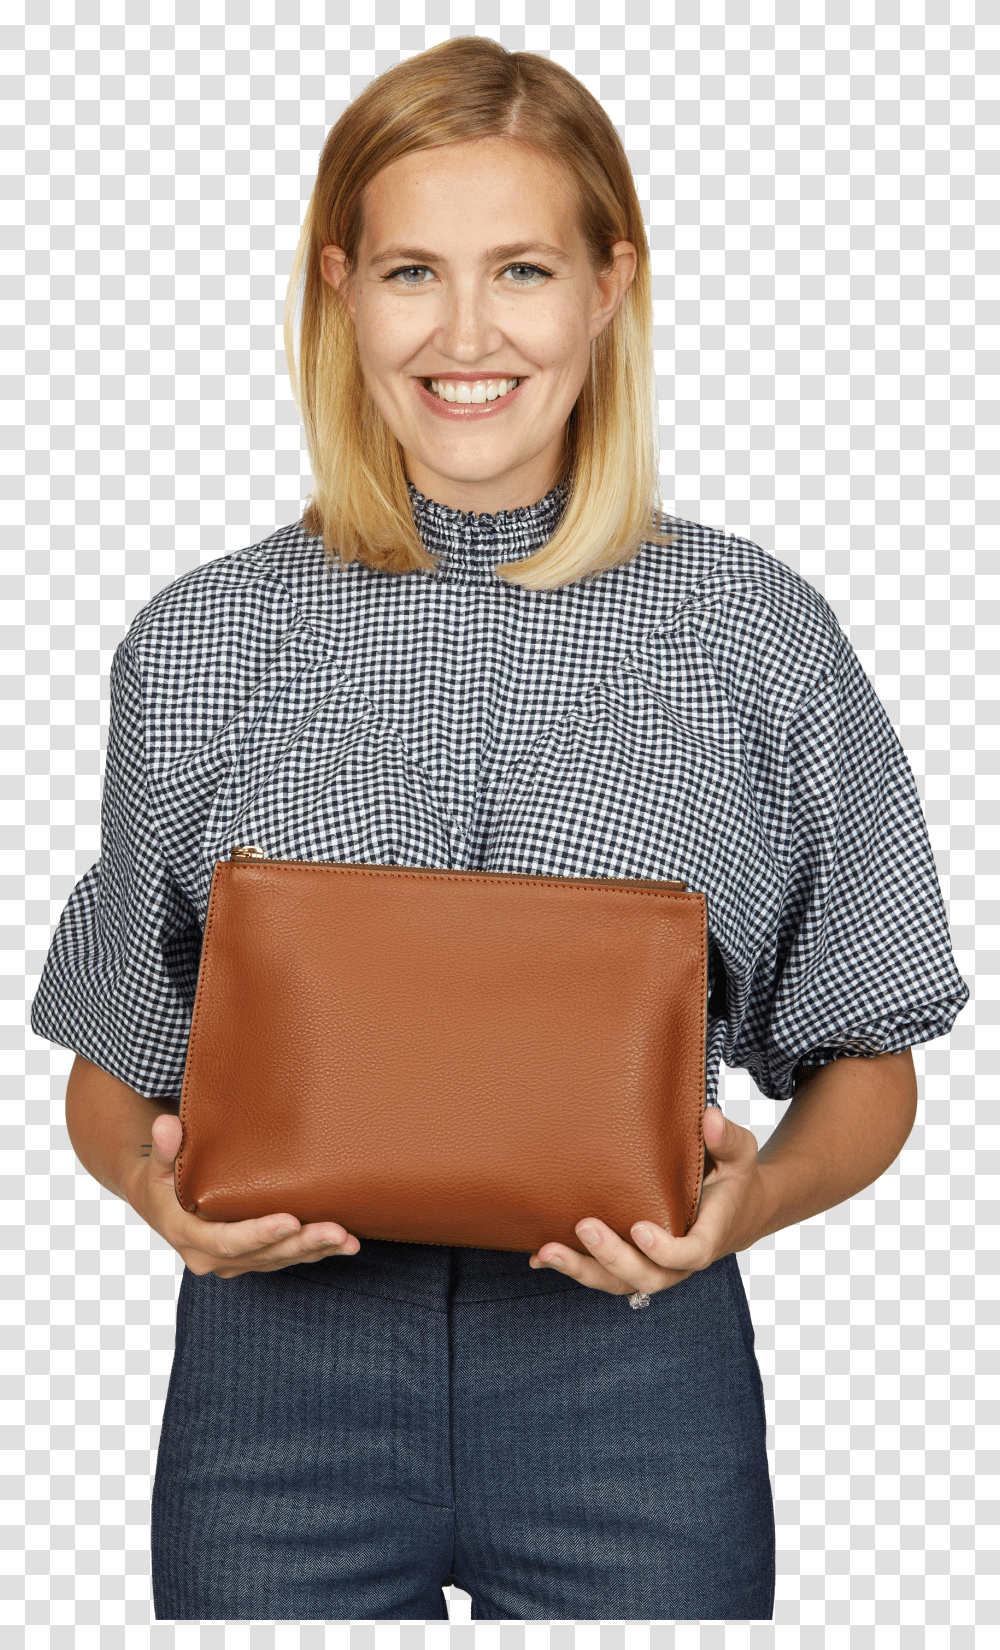 The Classic Cross Body Bag In CaramelClass Girl Transparent Png